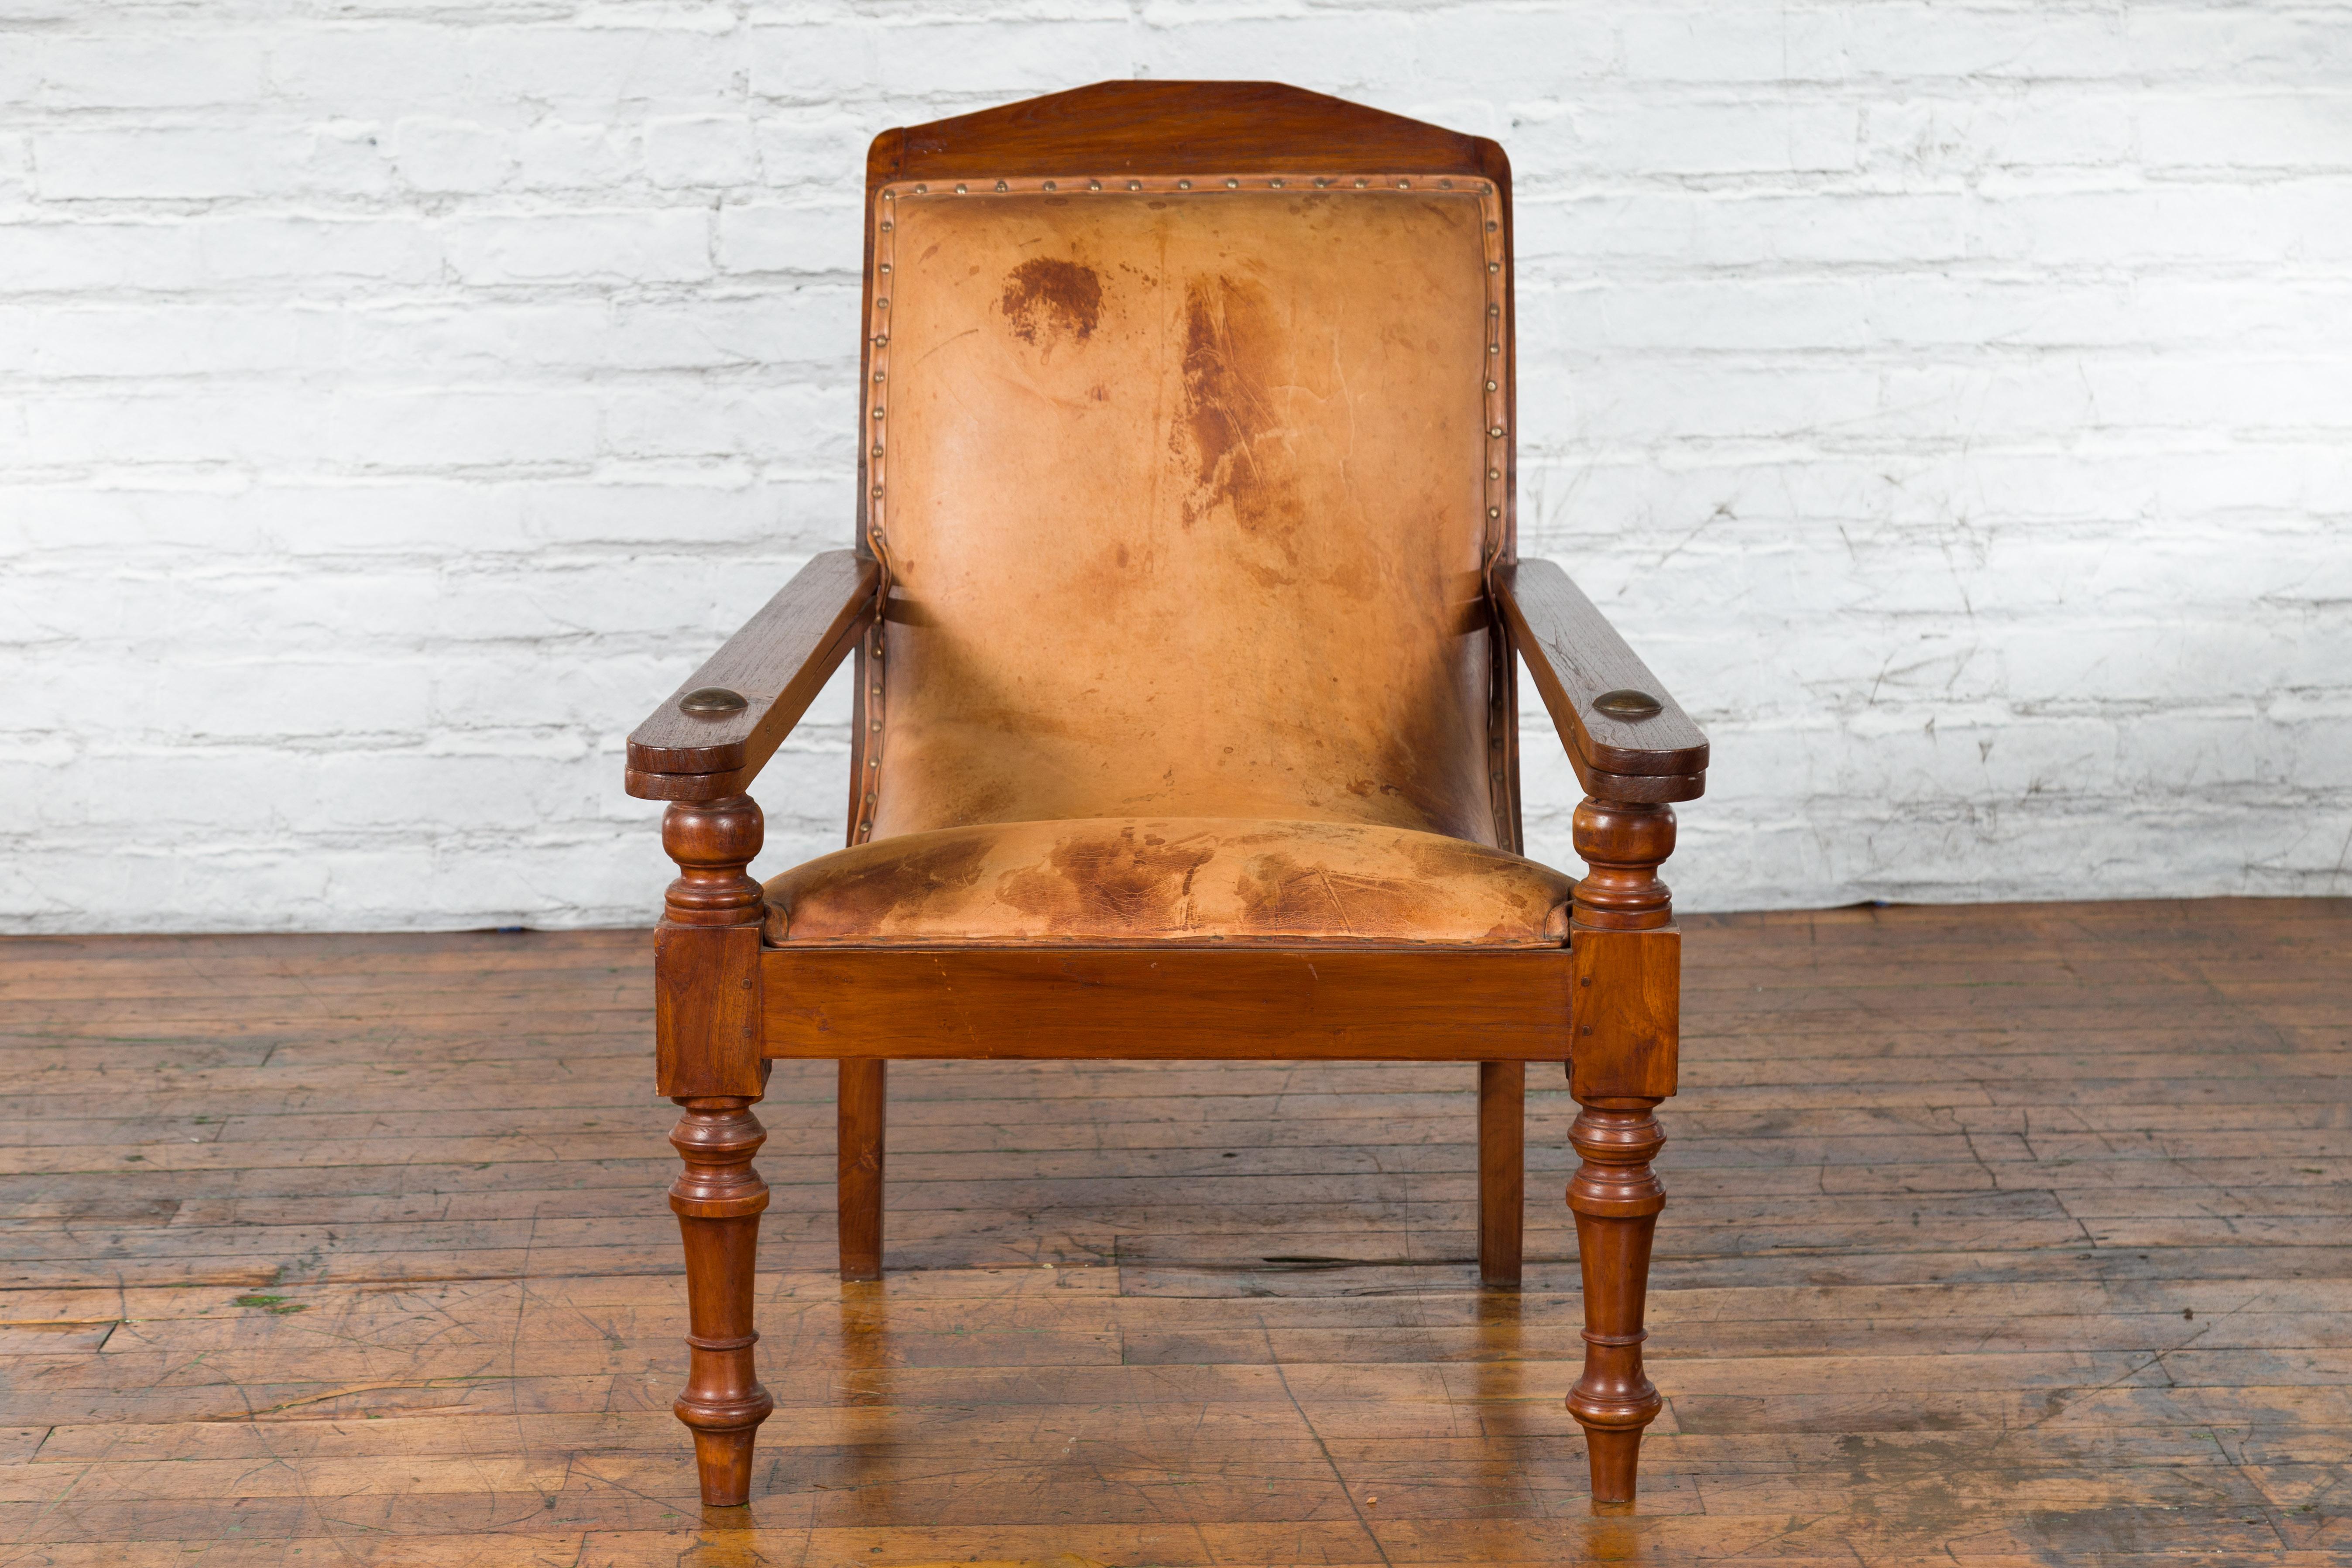 A Dutch Colonial period Indonesian wooden plantation lounge chair from the early 20th century with leather upholstery and nailhead trim. Created in Indonesia during the first half of the 20th century, this Dutch Colonial plantation chair features a